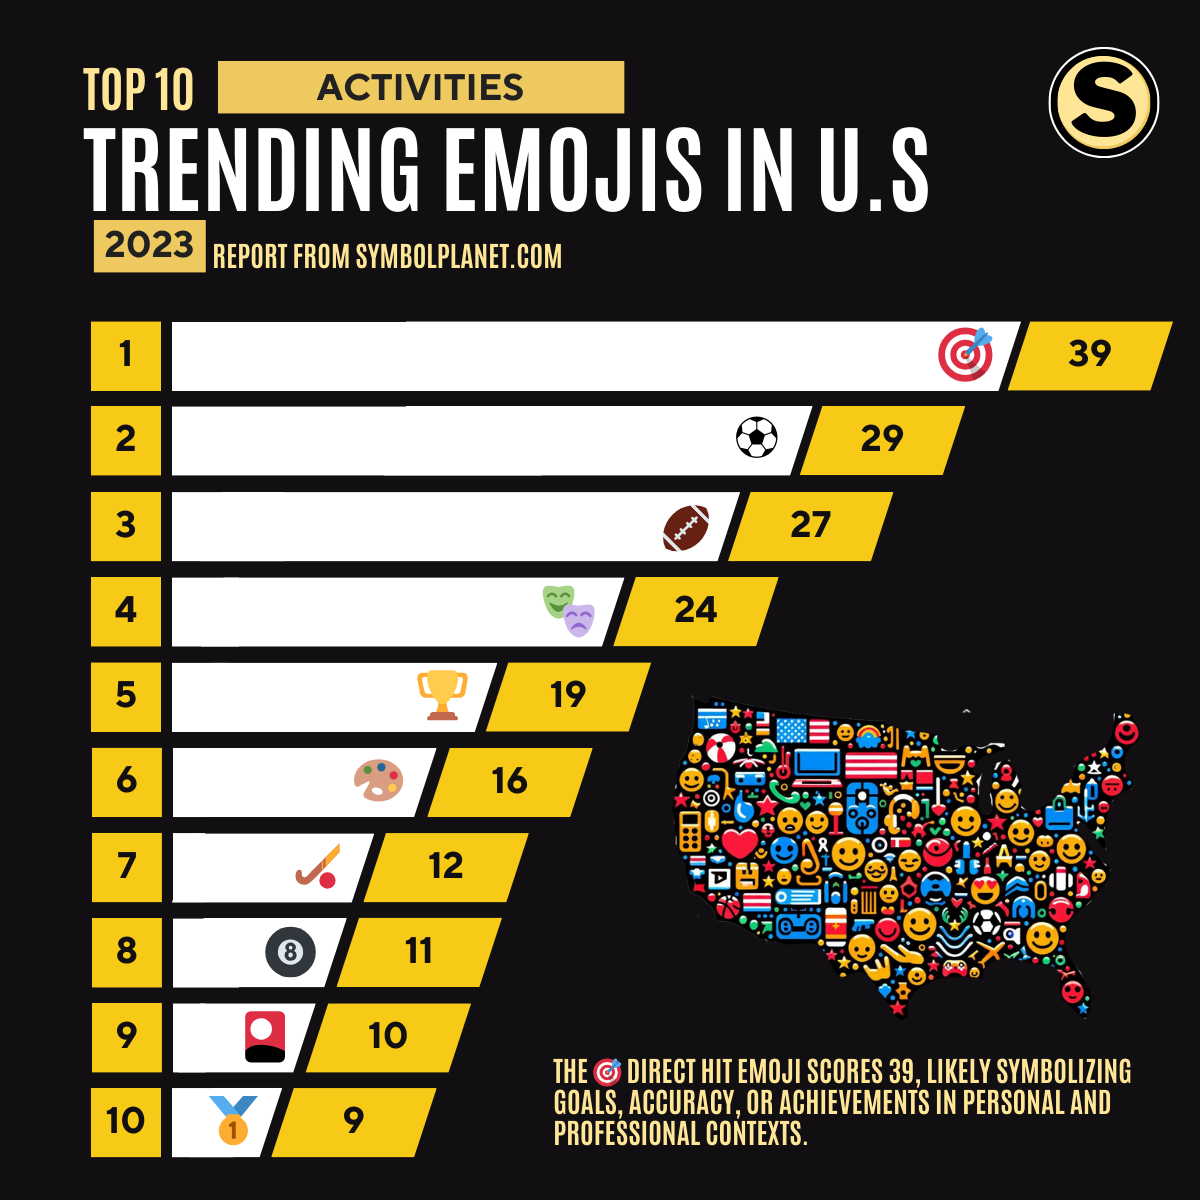 Top 10 Trending (Activities) Emojis of 2023 in the United States